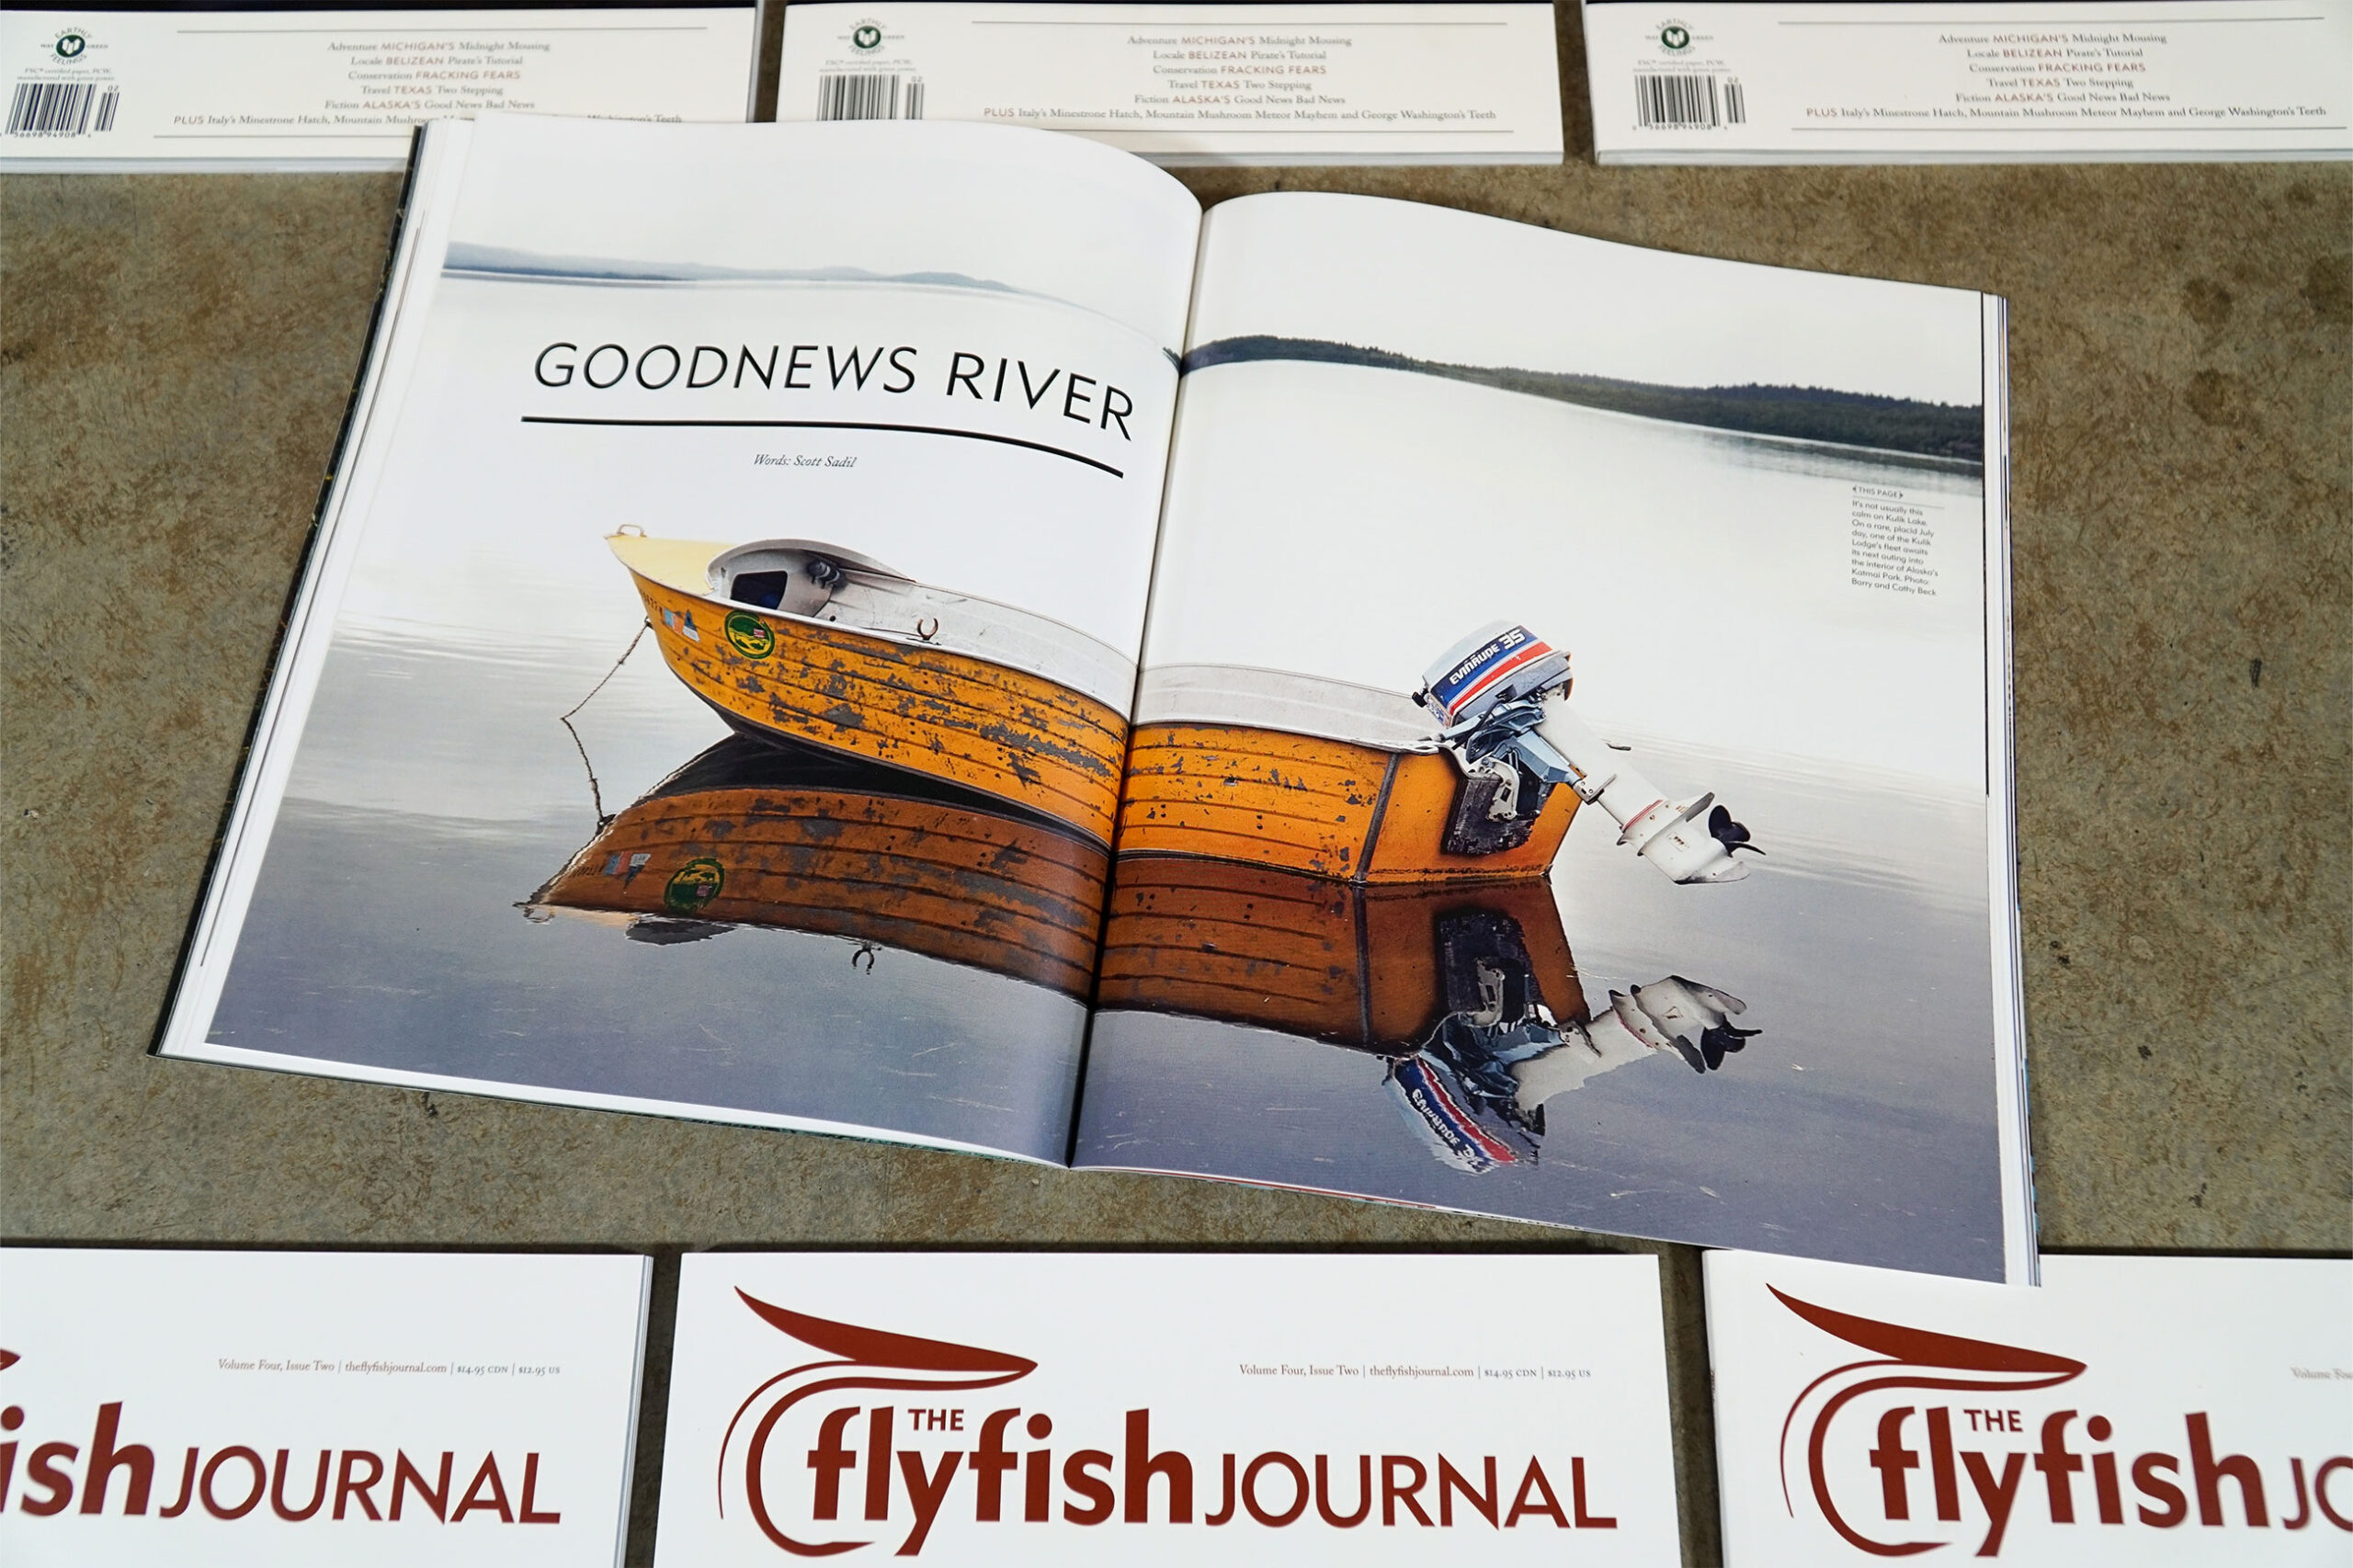 The Flyfish Journal Volume 4 Issue 2 Feature Goodnews River